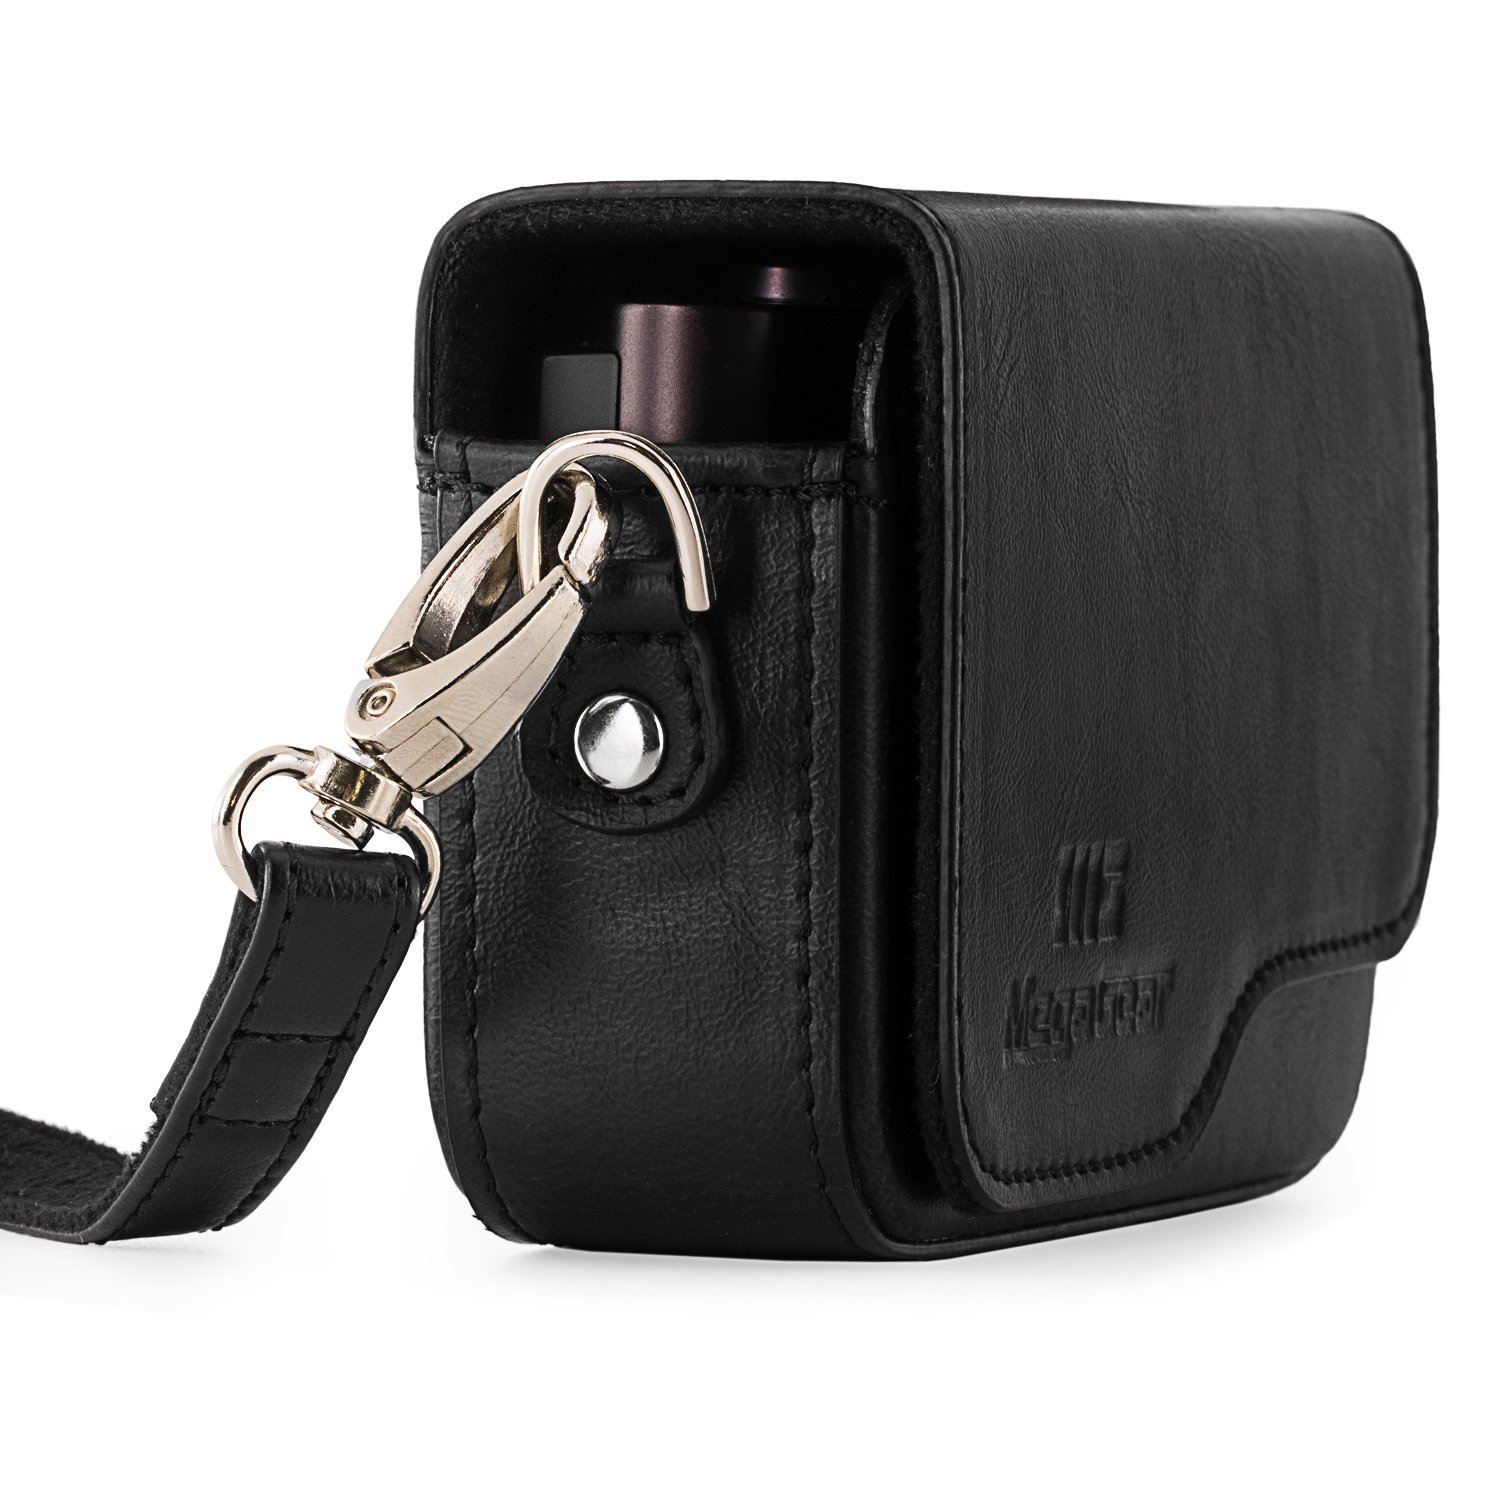 MegaGear Leica C Typ 112 Leather Camera Case with Strap - Black - MG1263